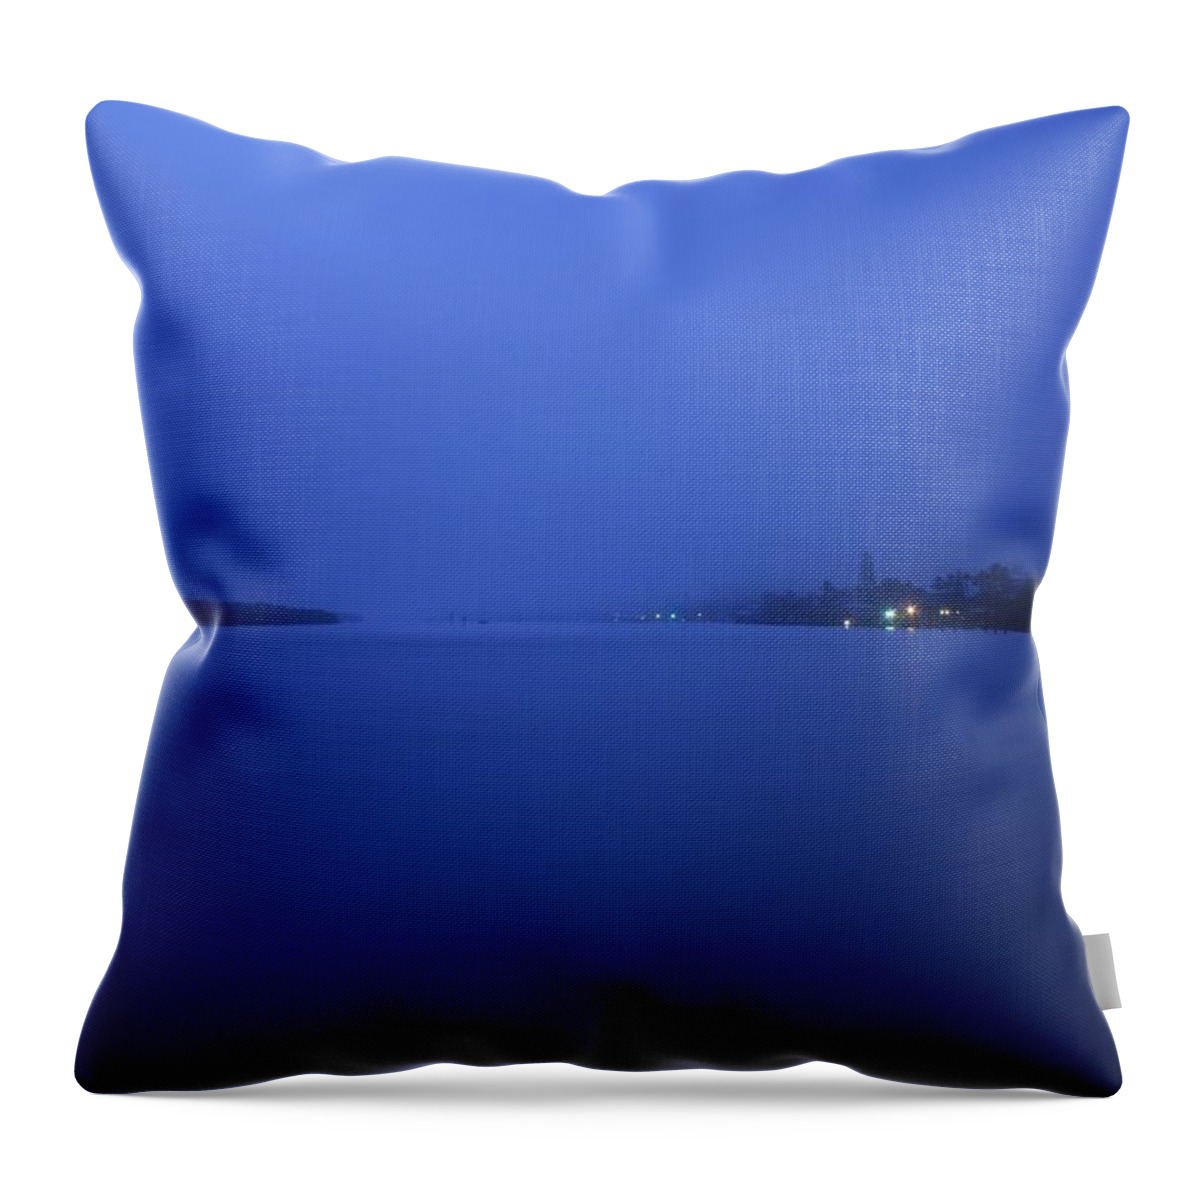 Nunweiler Throw Pillow featuring the photograph Placid by Nunweiler Photography